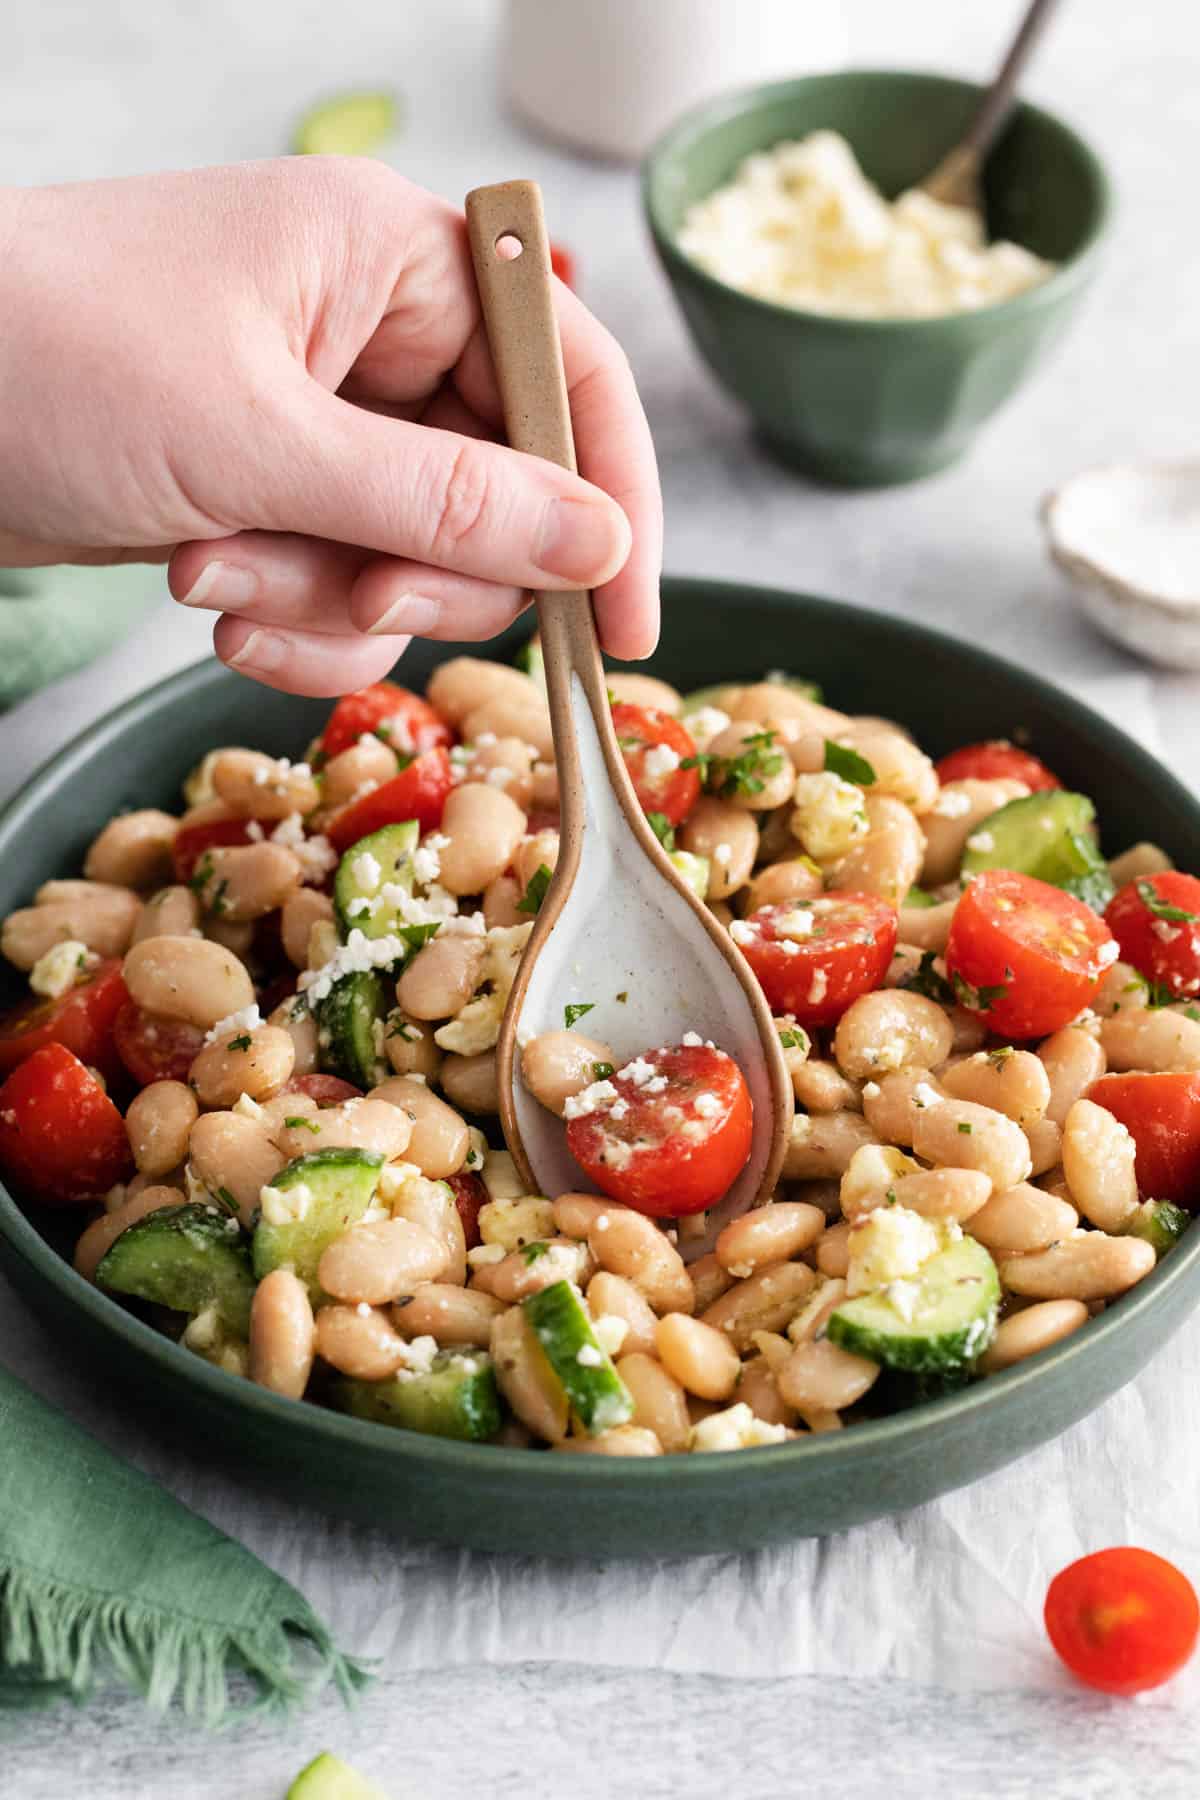 A hand holding a spoon getting a scoop of Mediterranean White Bean Salad from a plate.